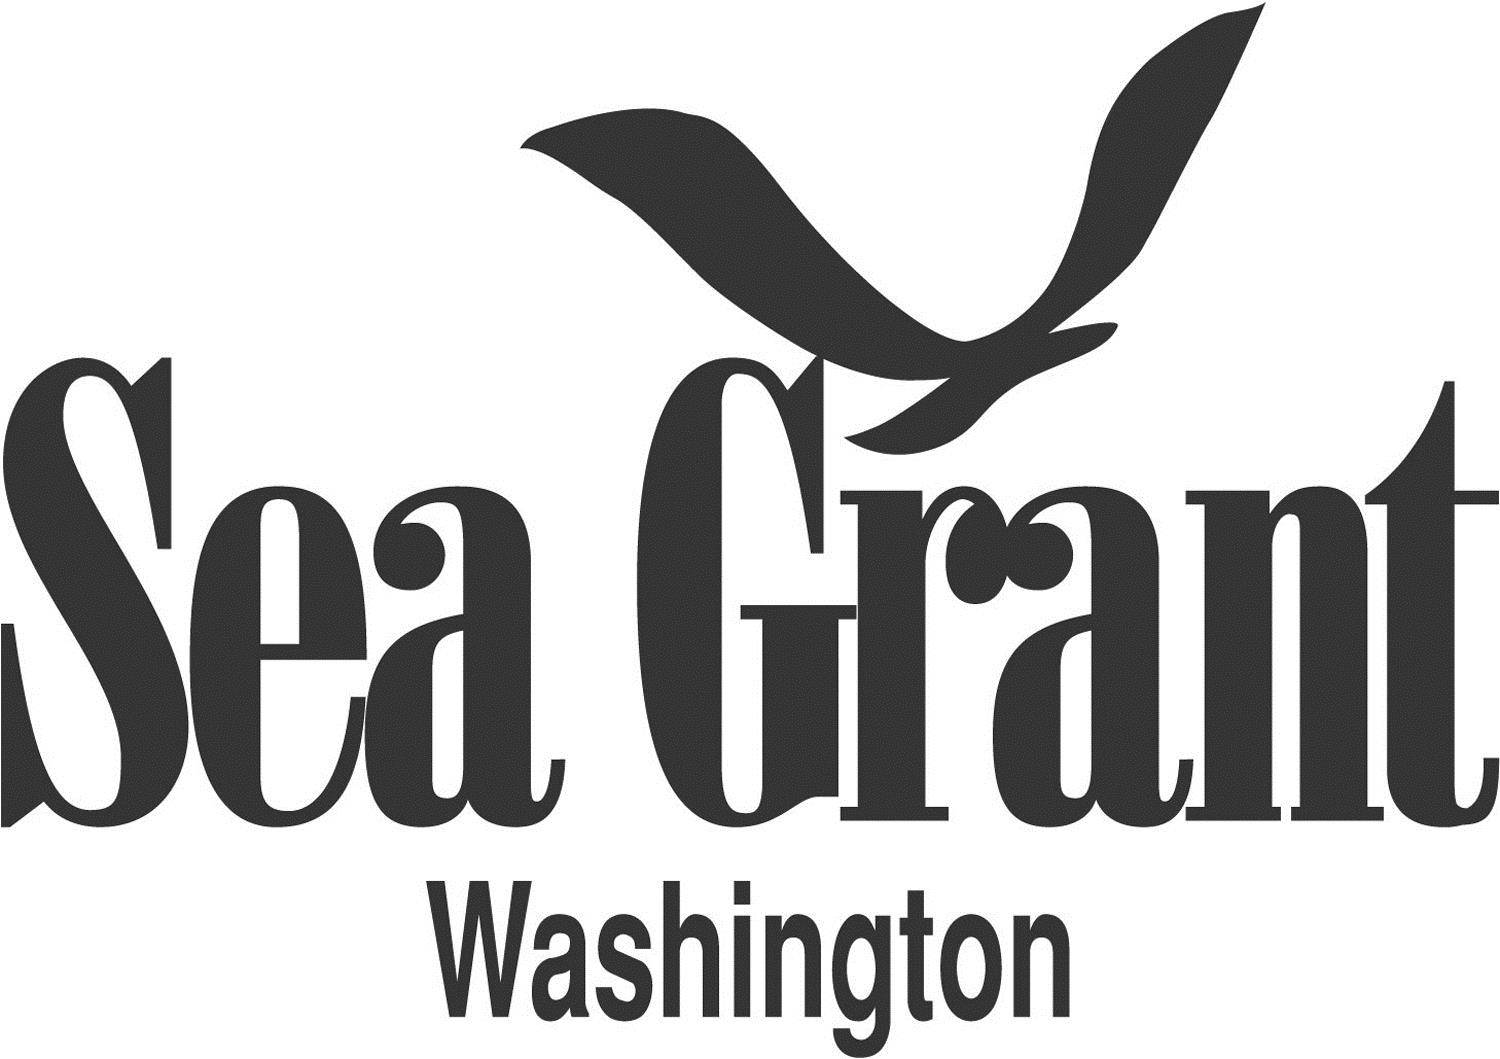 Russell Callender is new director of Washington Sea Grant